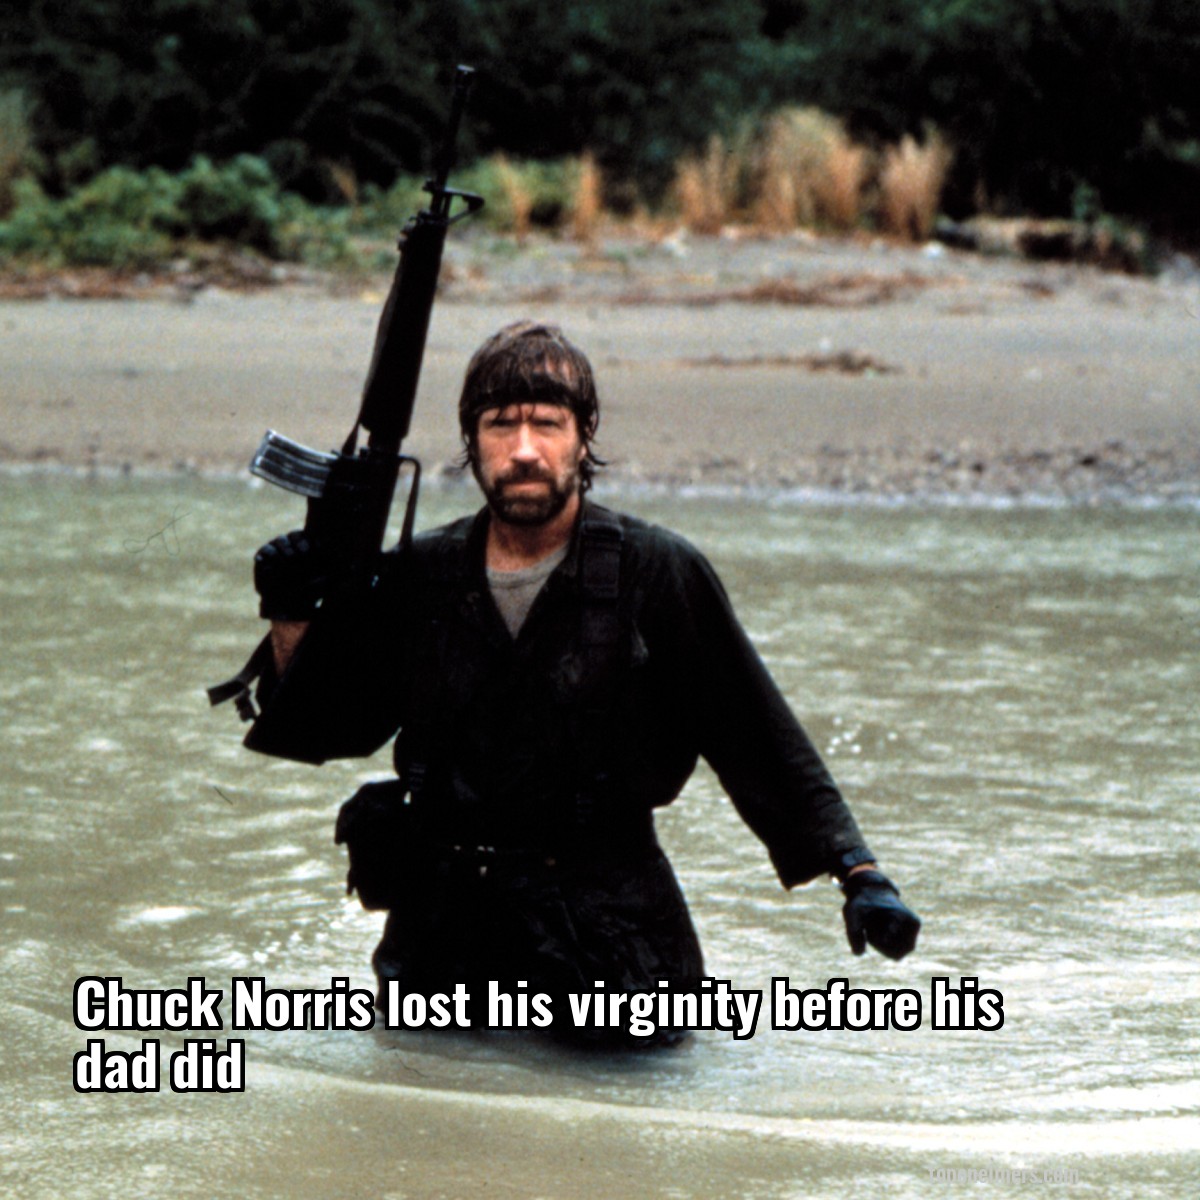 Chuck Norris lost his virginity before his dad did